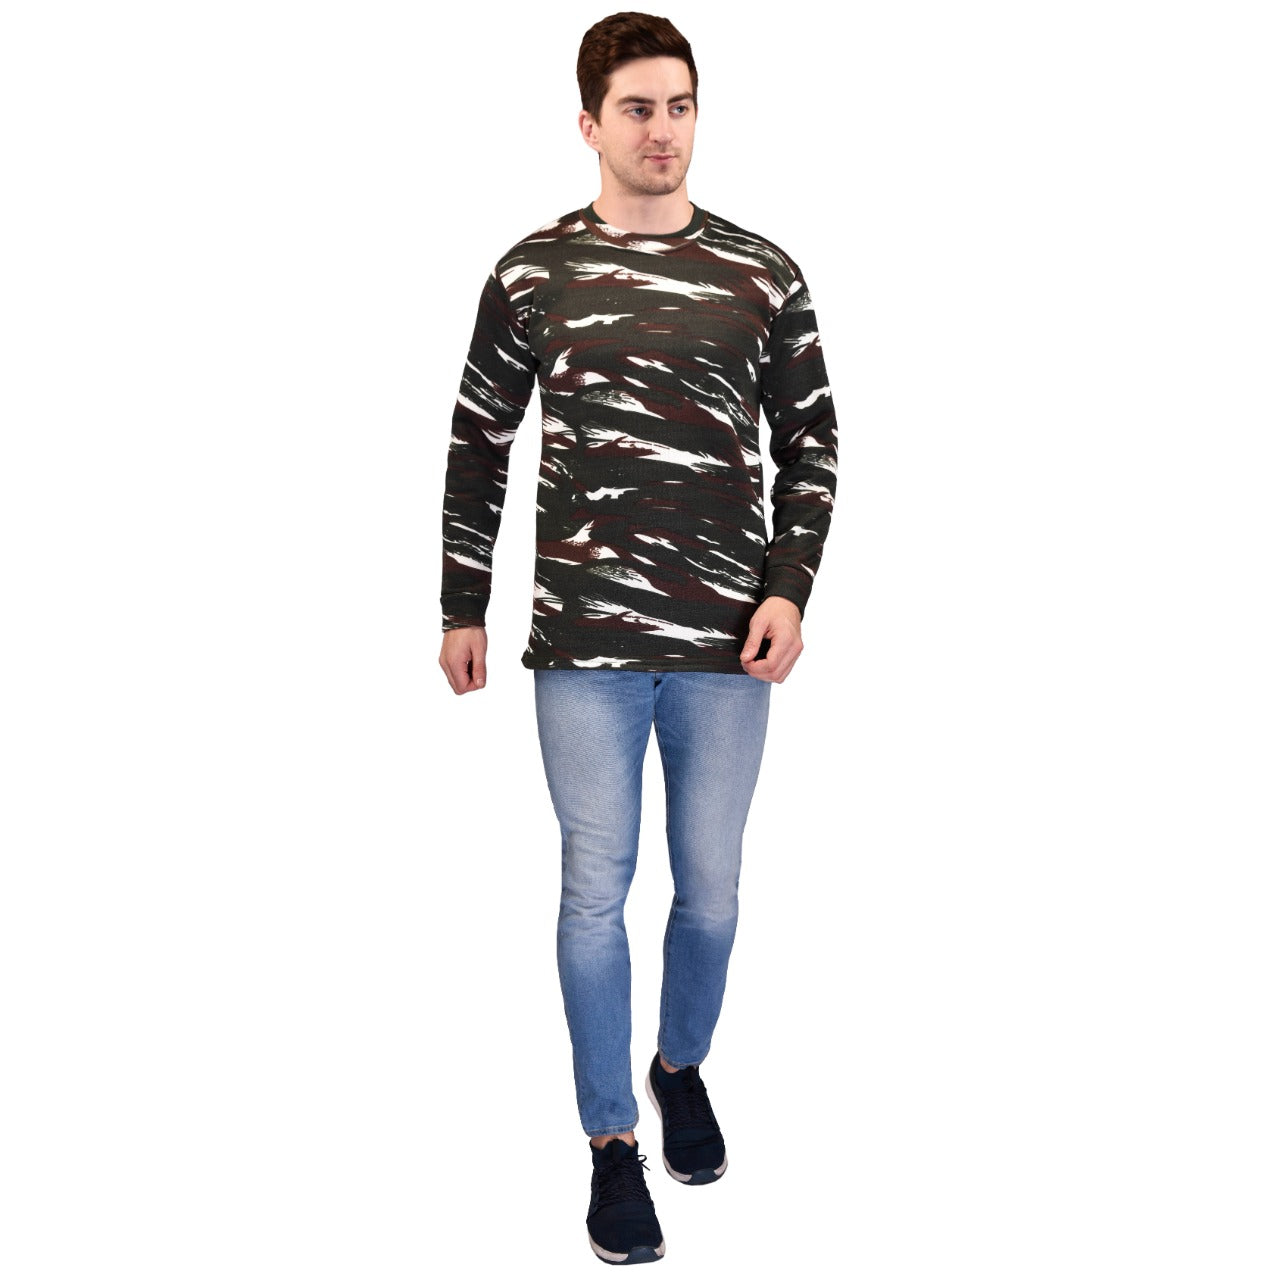 CRPF Camouflage Round Neck Full Sleeve Unisex Winter Sweat Shirt Army Military Defence